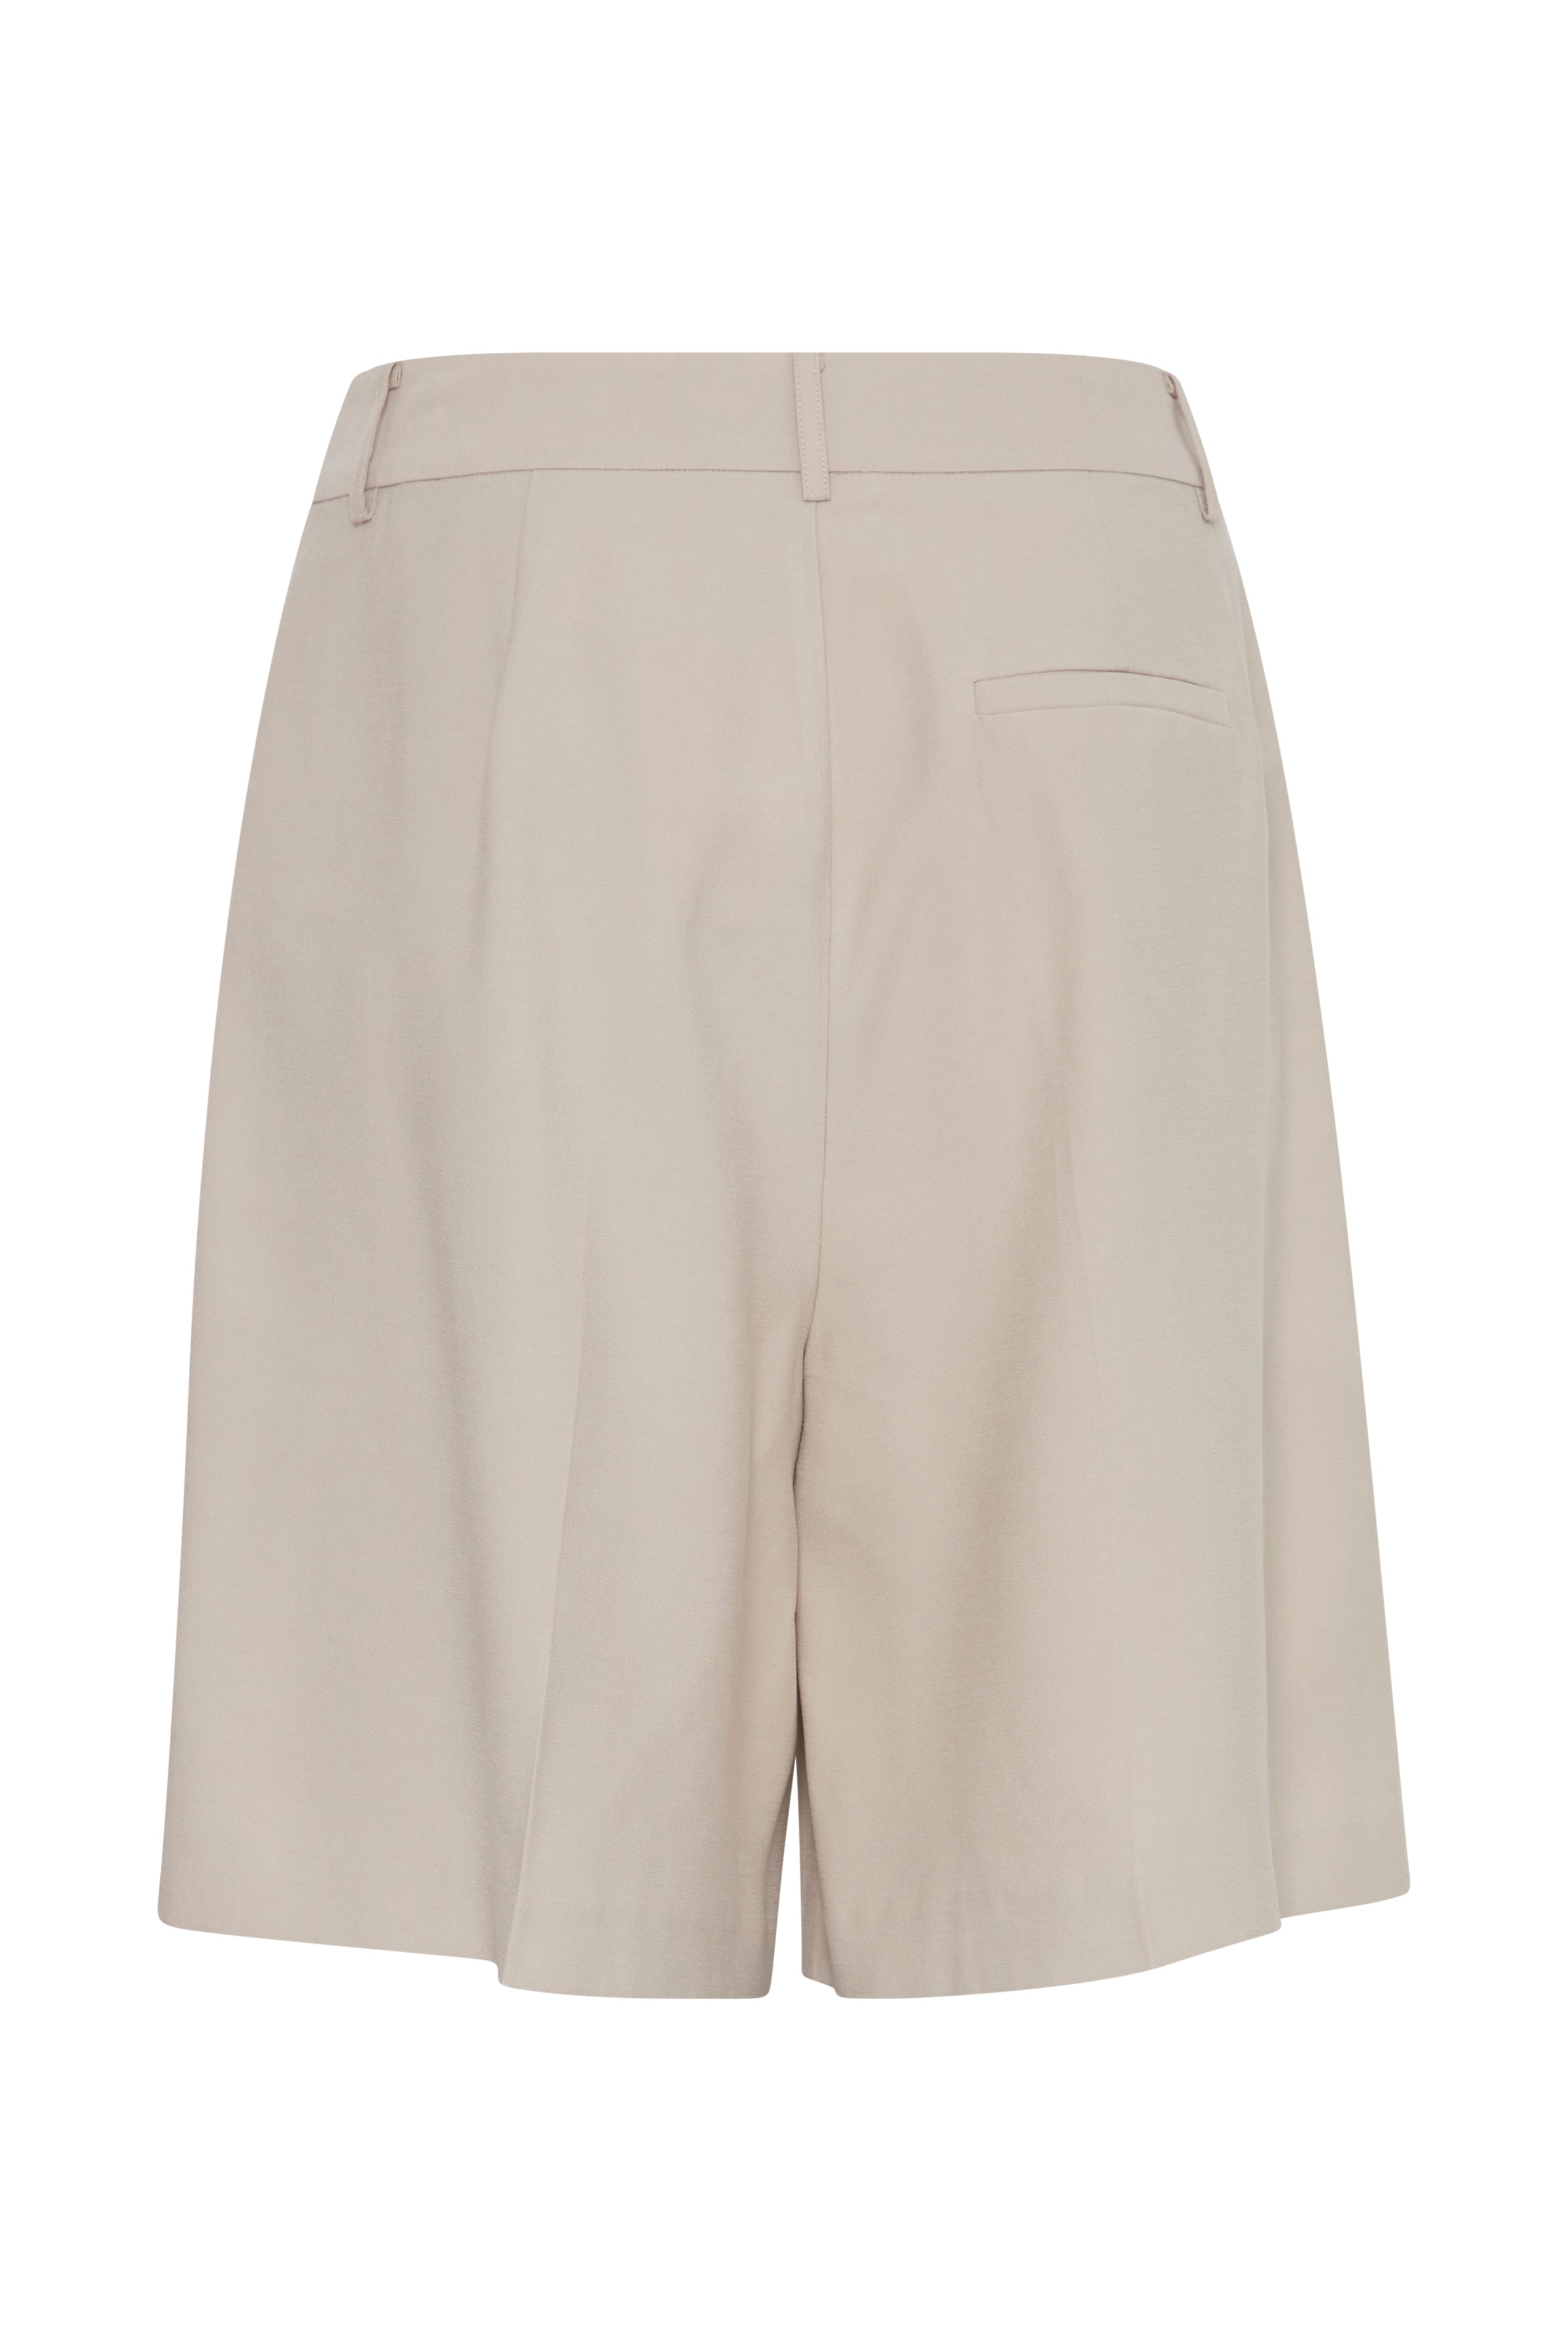 Rivaly Shorts in Oxford Tan